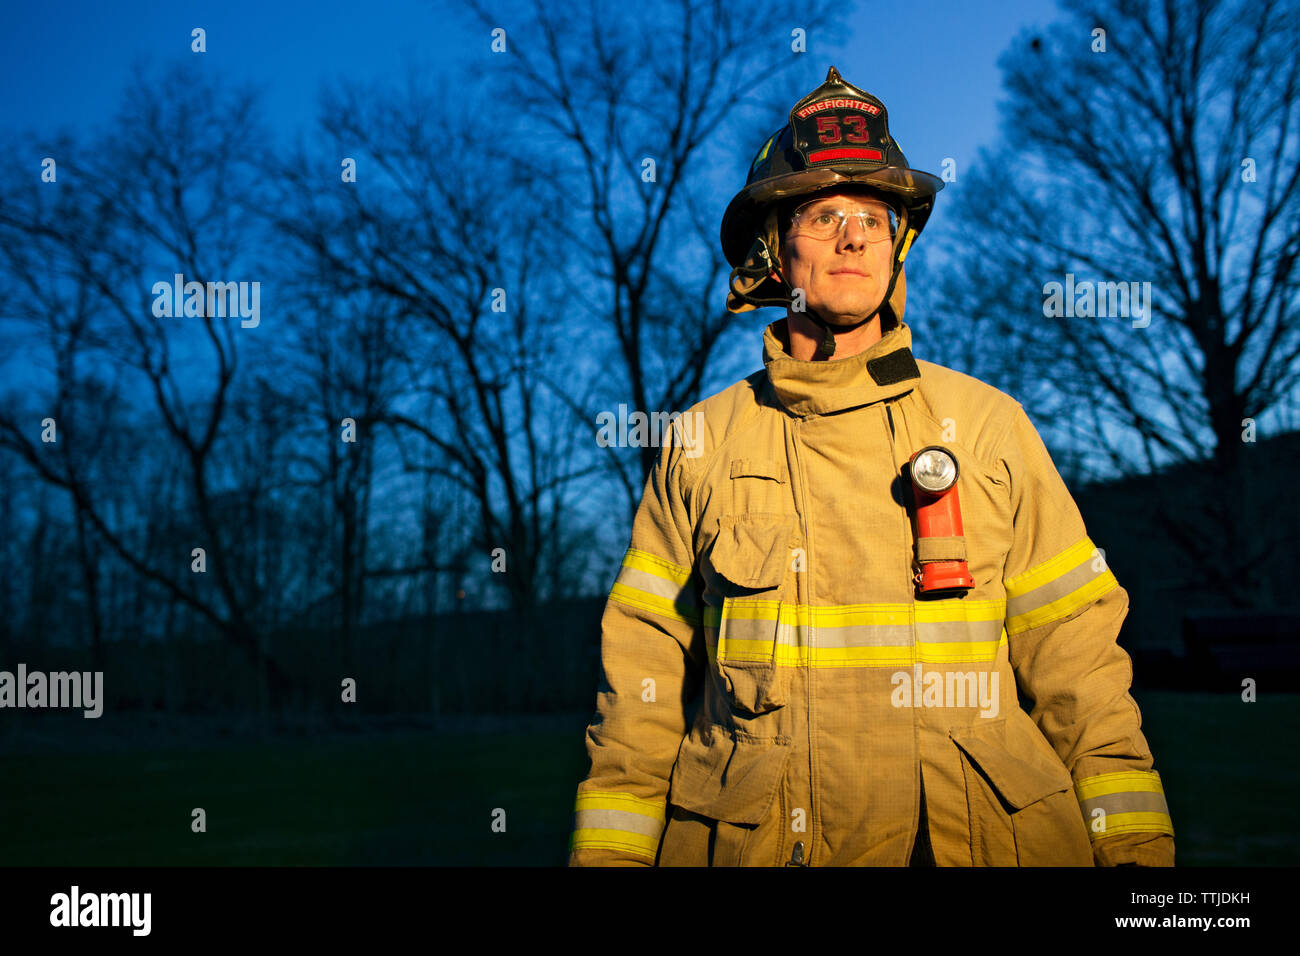 Firefighter looking away while standing against trees at night Stock Photo